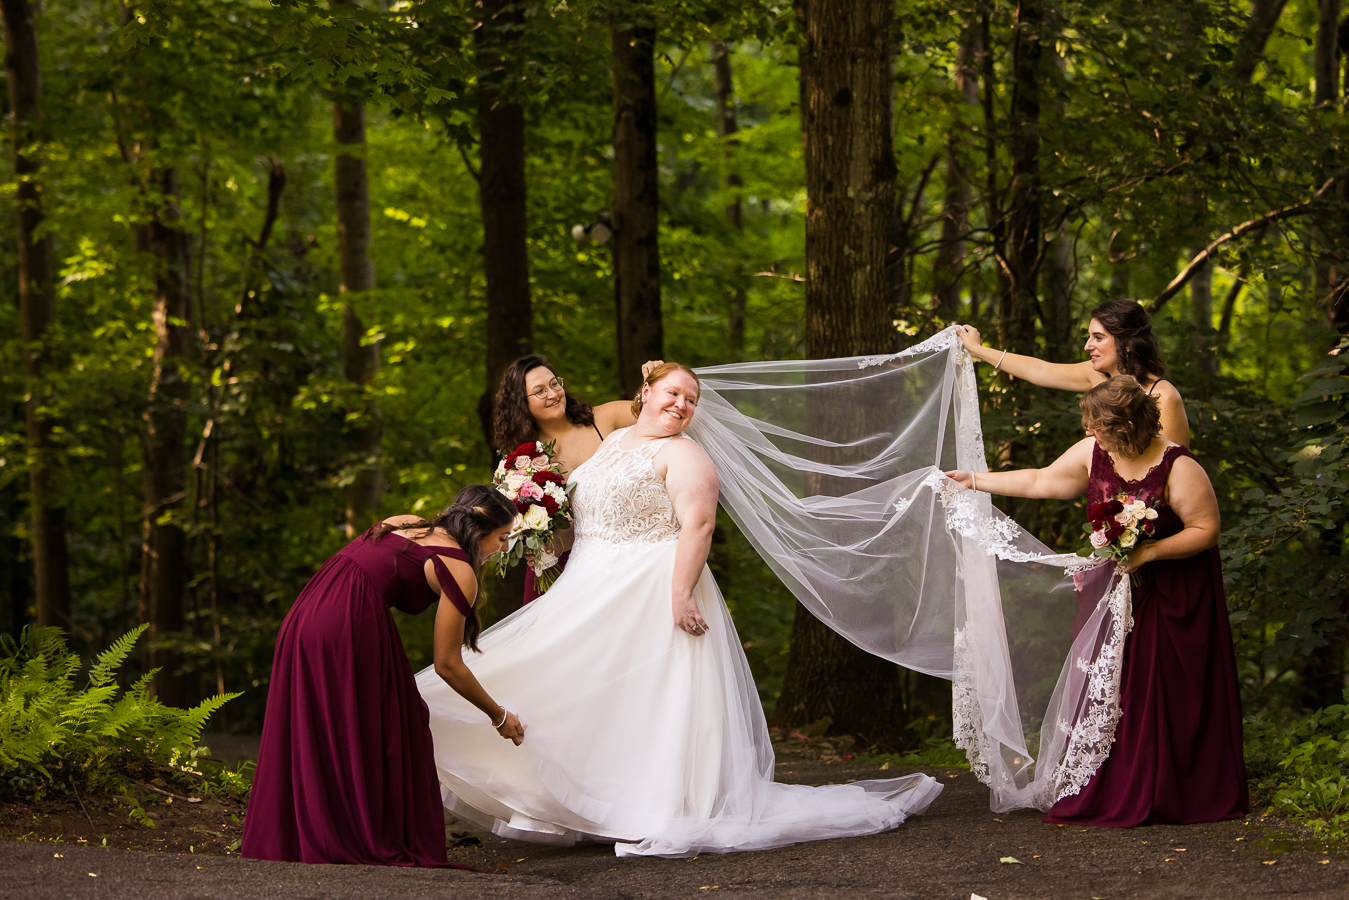 outdoor bridal party photographer, lisa rhinehart, captures this image of the bridesmaids dressed in maroon as they gather around the bride while laying out her veil and dress surrounded by the trees and mountains